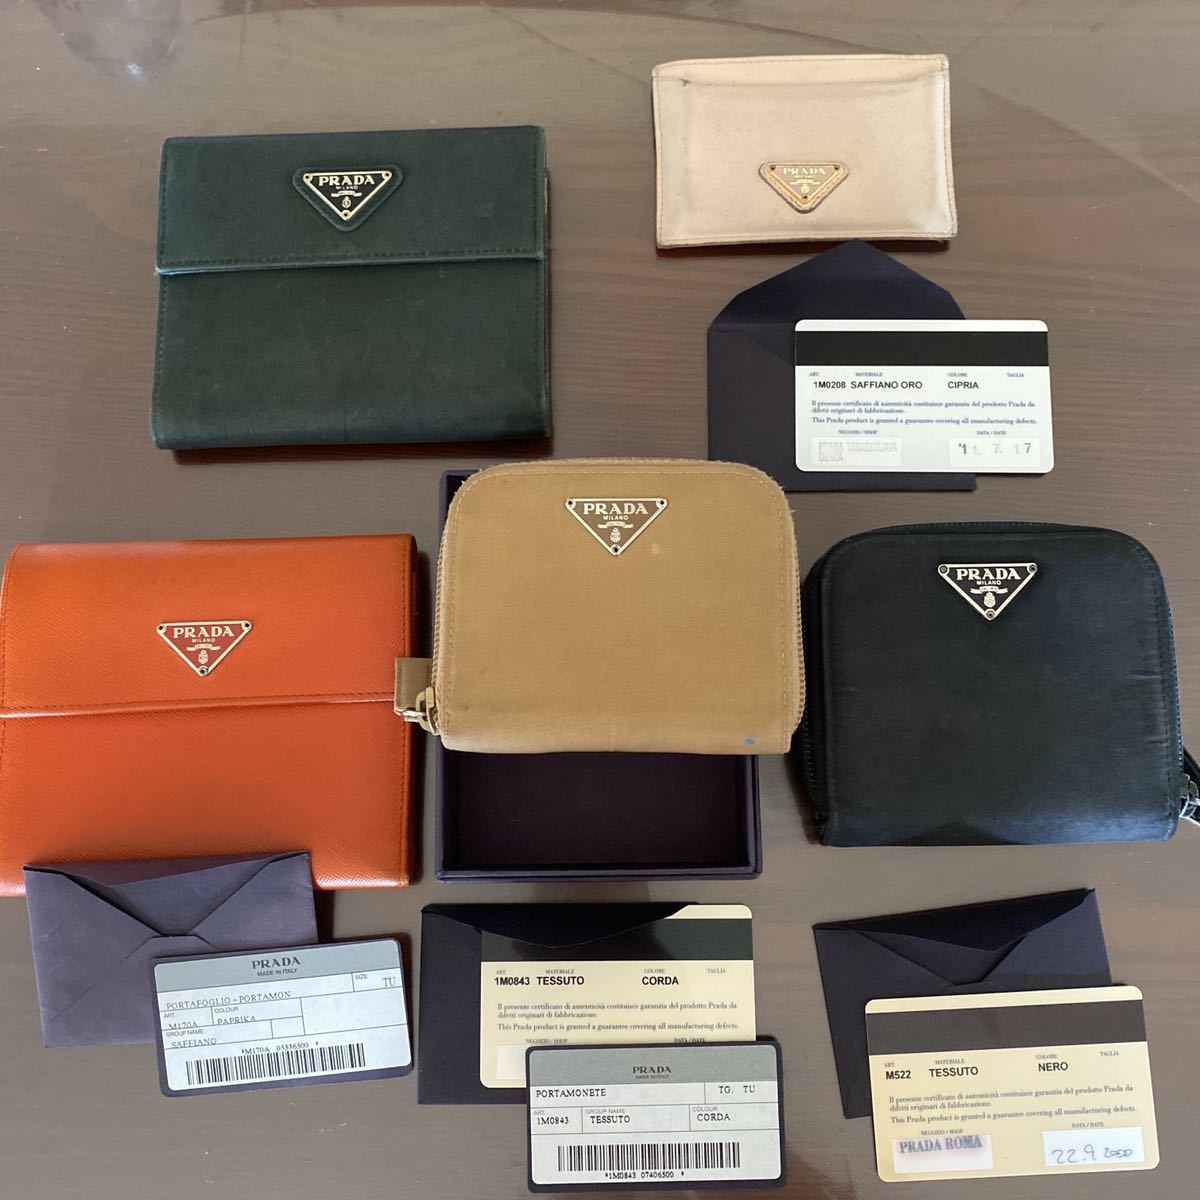 PRADA 折り財布 財布 長財布 カードケース まとめ売り プラダ メンズ レディース ユニセックス サファリアーノ product details  | Proxy bidding and ordering service for auctions and shopping within Japan  and the United States - Get the